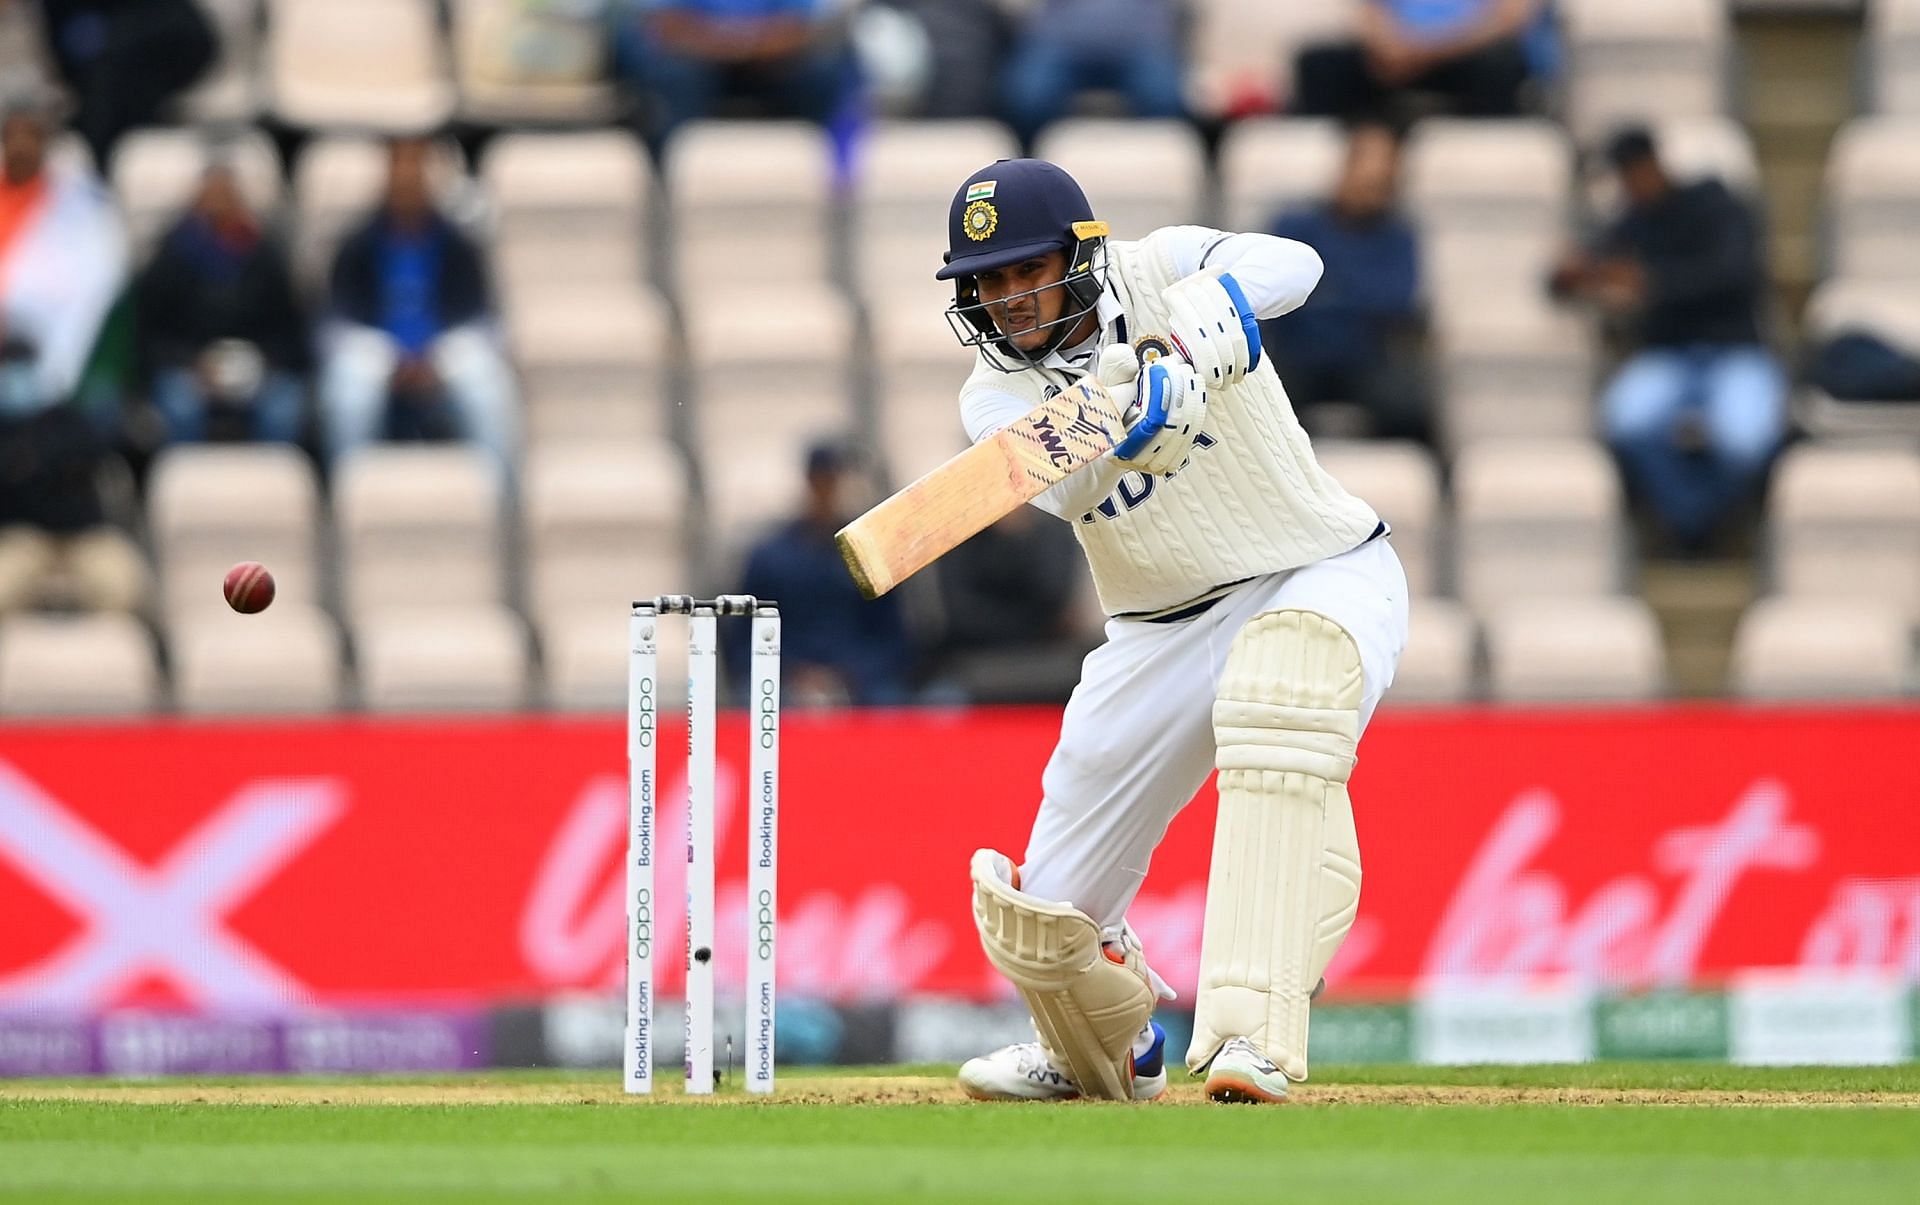 Shubman Gill scored a half-century in the first innings of the Kanpur Test